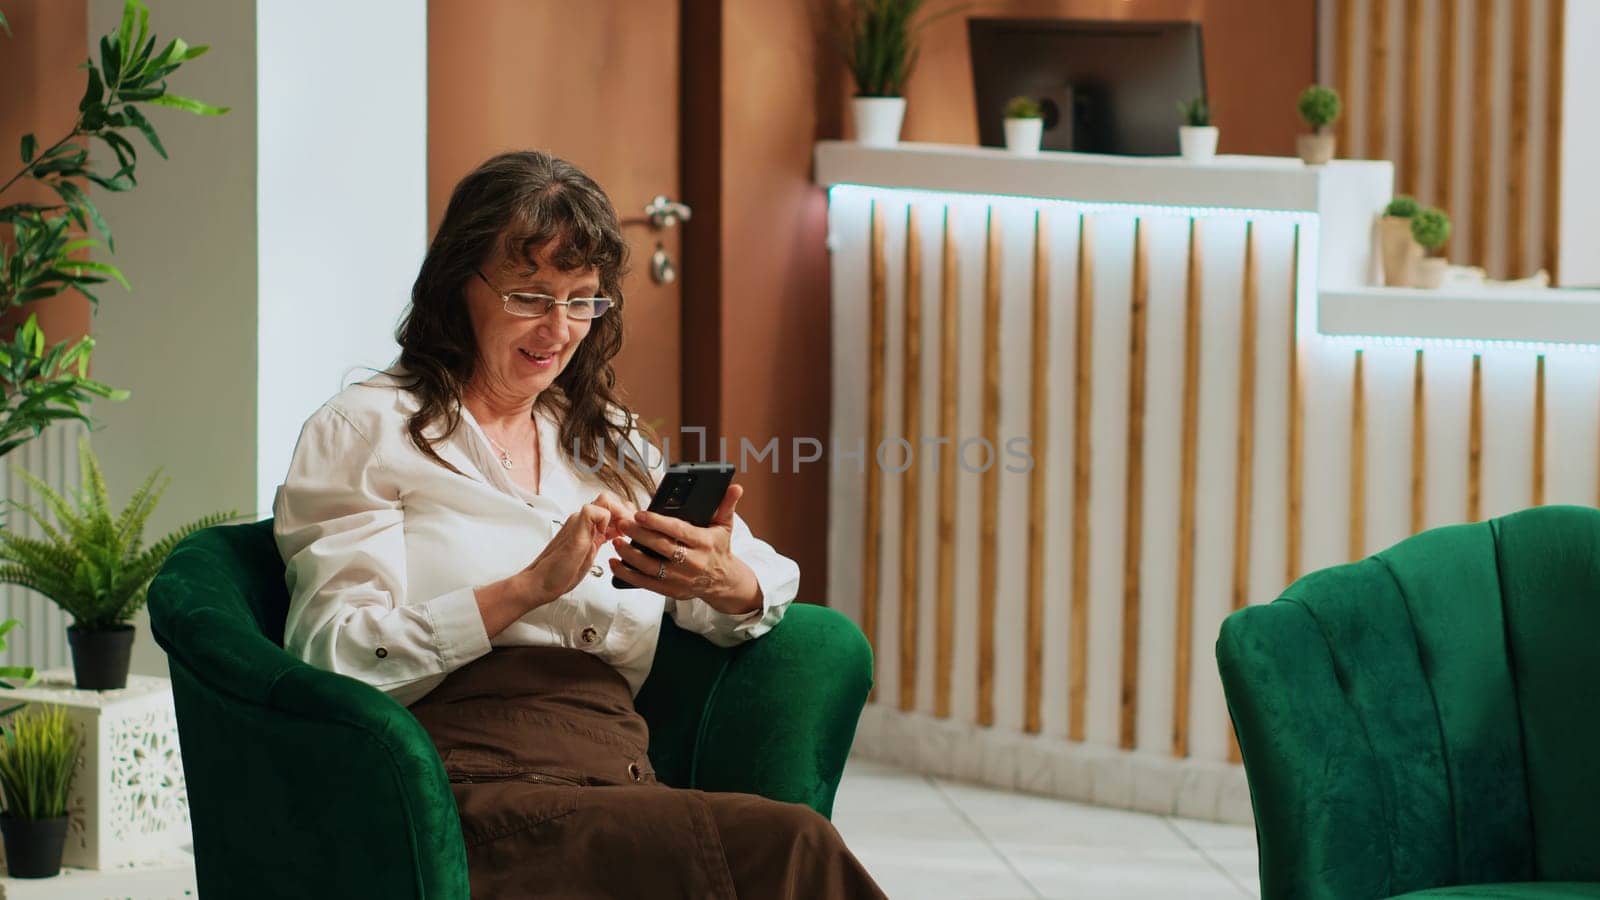 Old person checking text messages after long flight, waiting for check in process at five star hotel. Senior woman browsing smartphone apps in lounge area, relaxing in lobby.